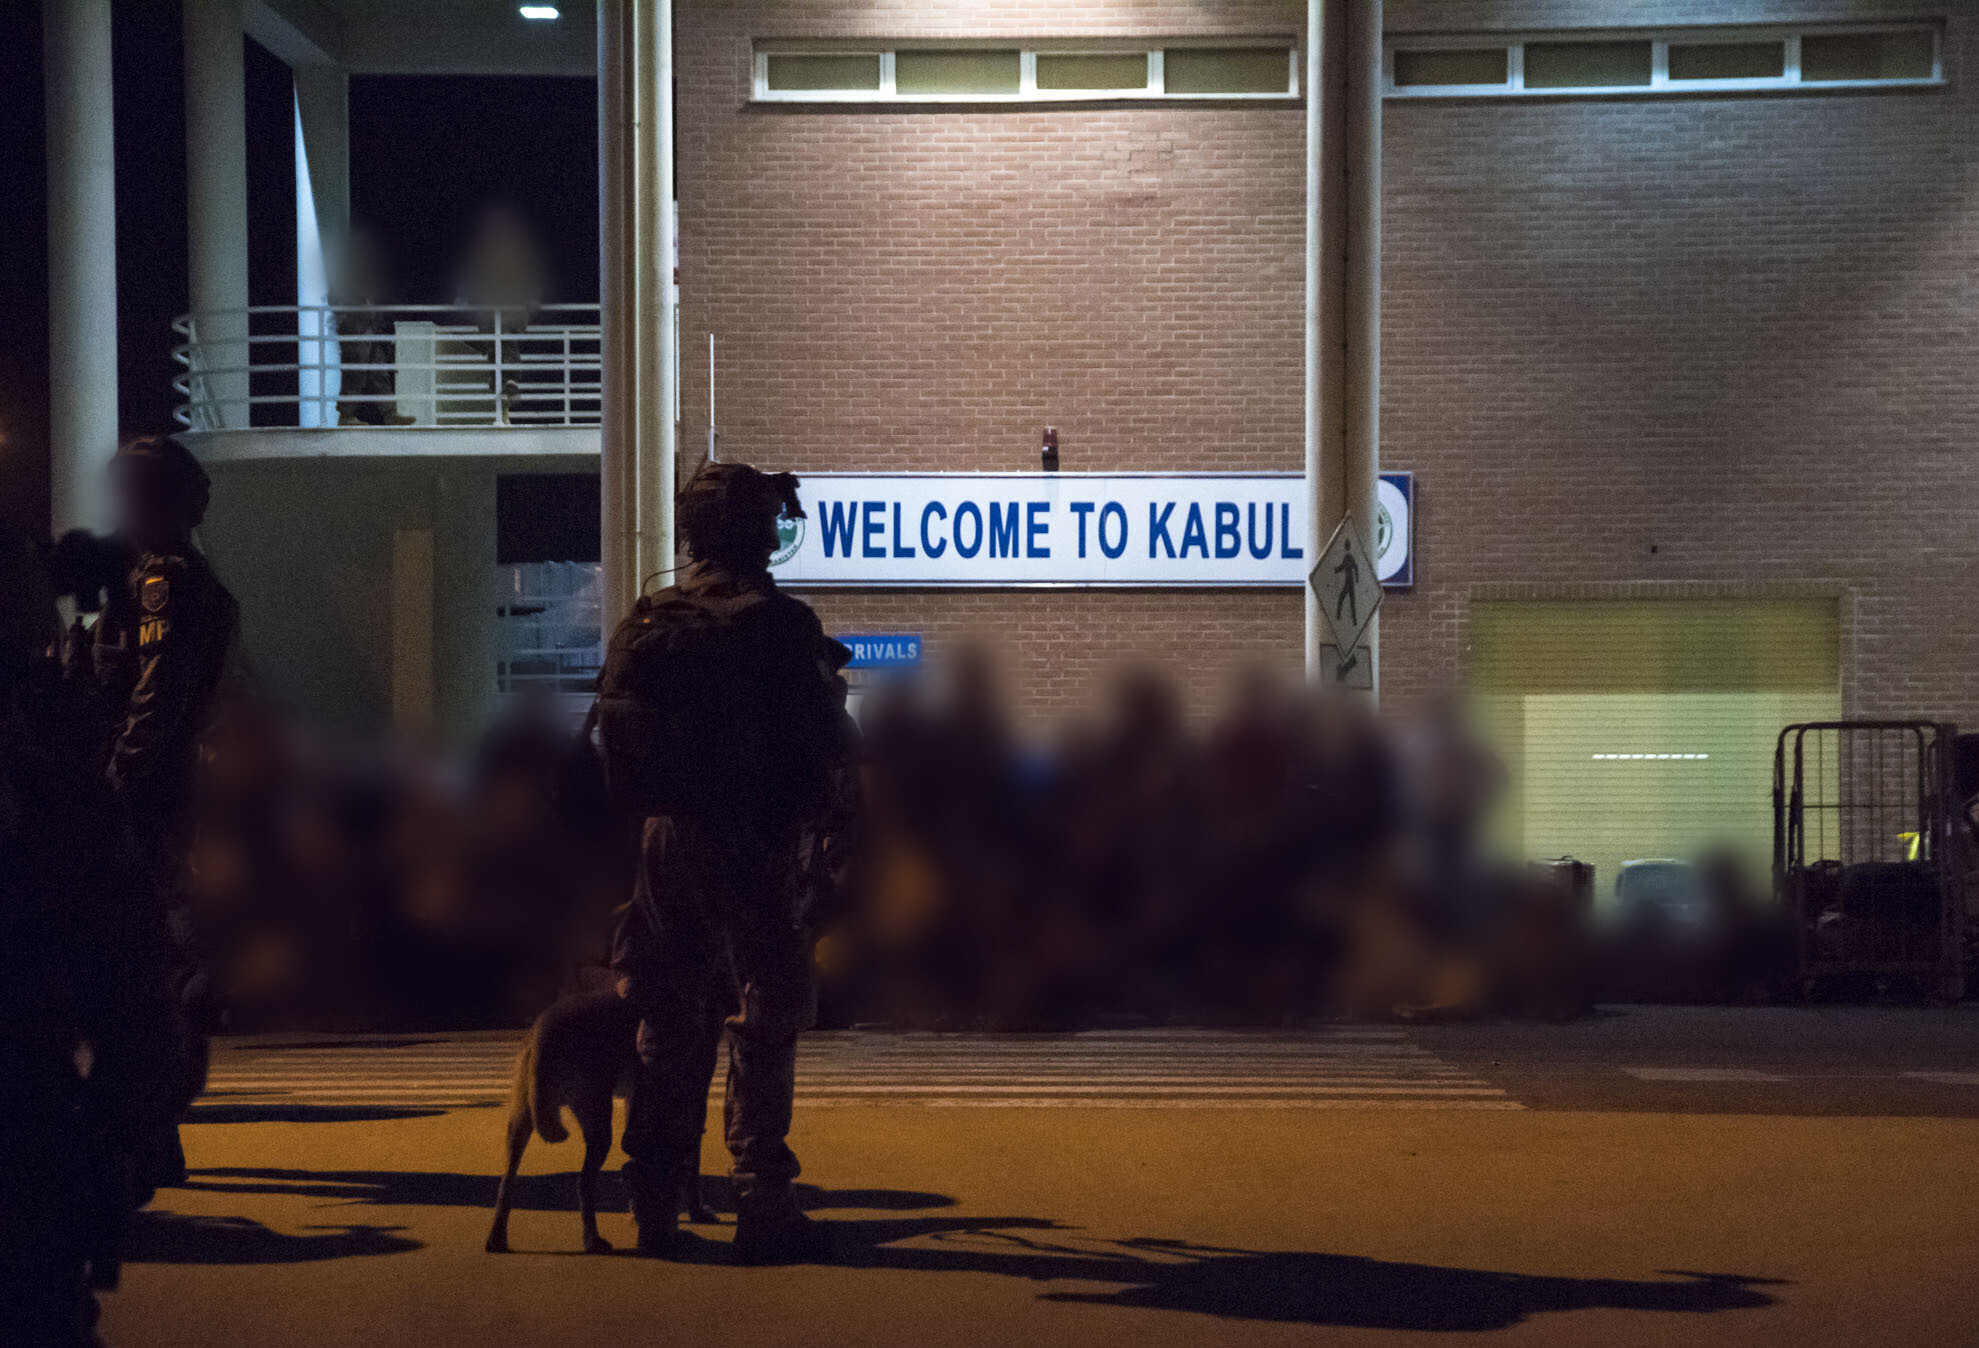 Handout photo taken and released by the French Etat-major des Armees on August 17th, 2021 shows special forces secure the area while French and Afghan nationals board a military transport plane at Kabul Airport.